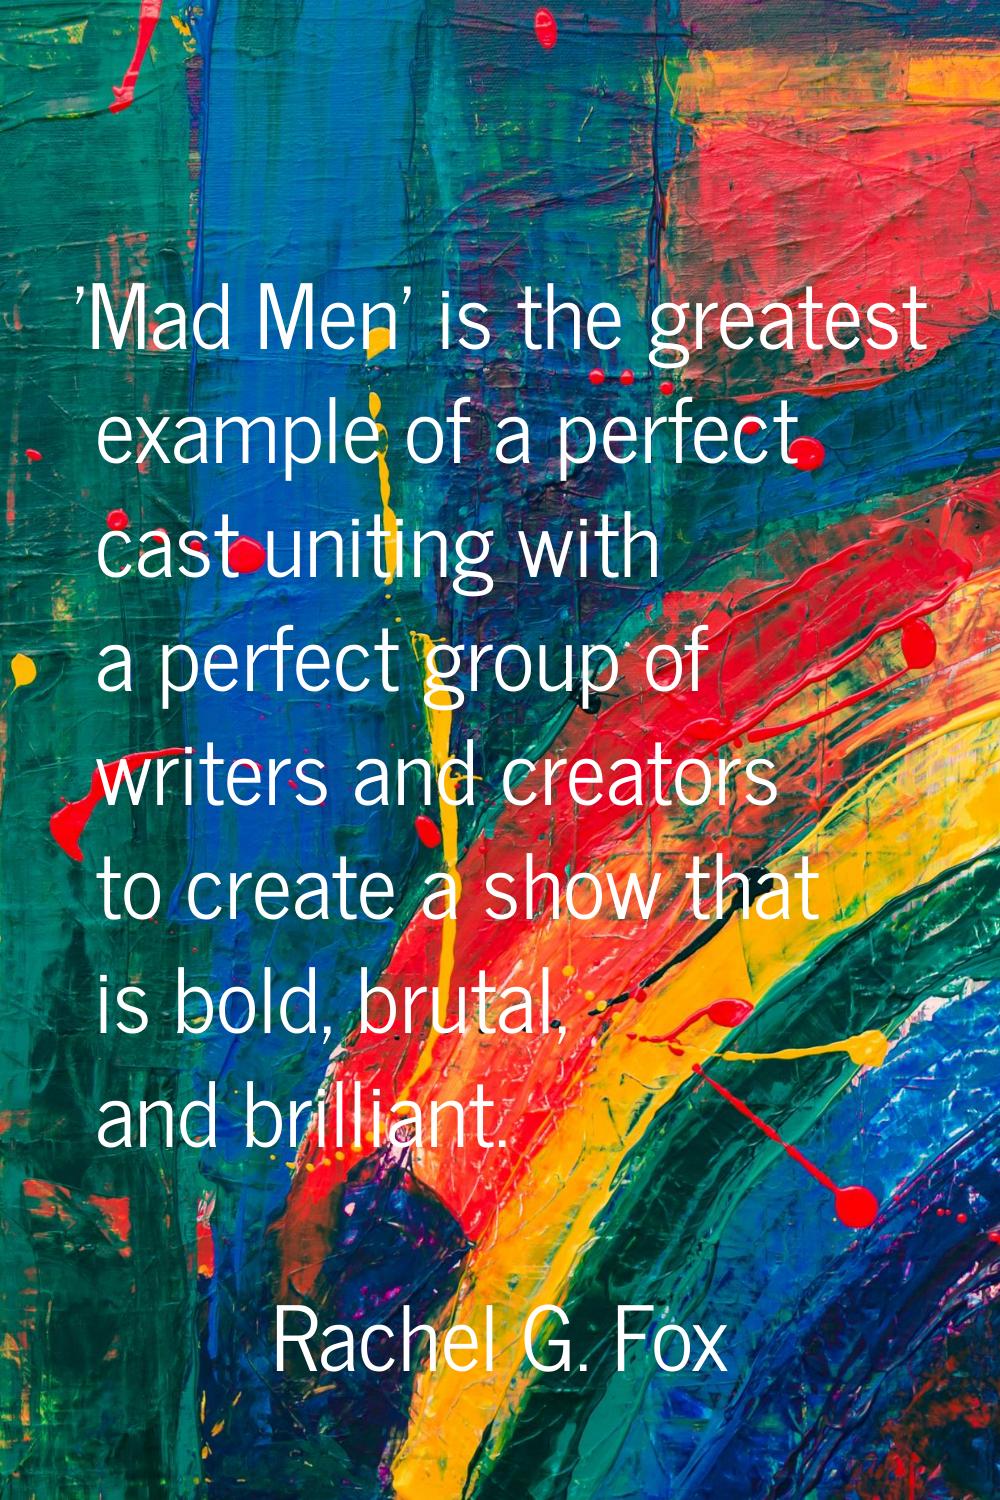 'Mad Men' is the greatest example of a perfect cast uniting with a perfect group of writers and cre